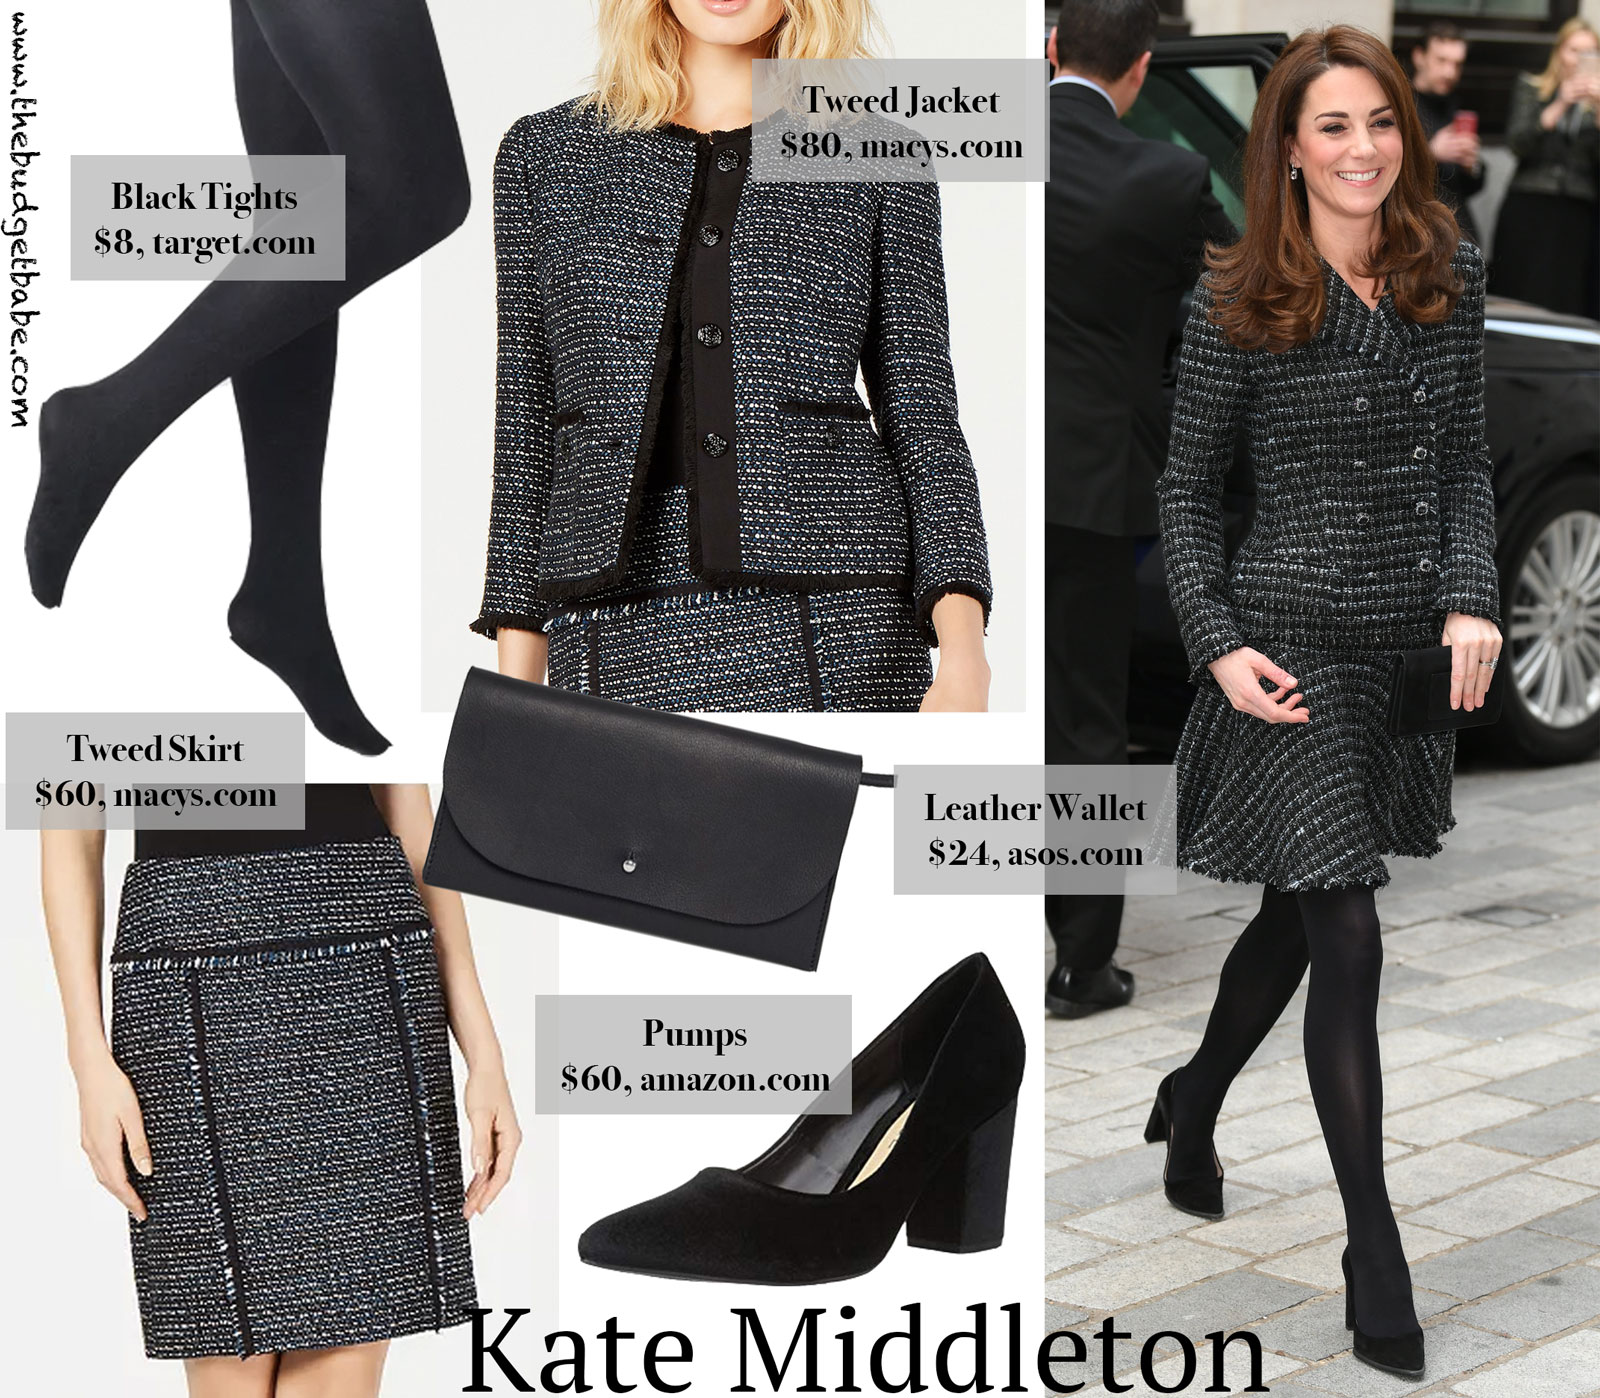 Katie Middleton Tweed Blazer and Skirt Look for Less